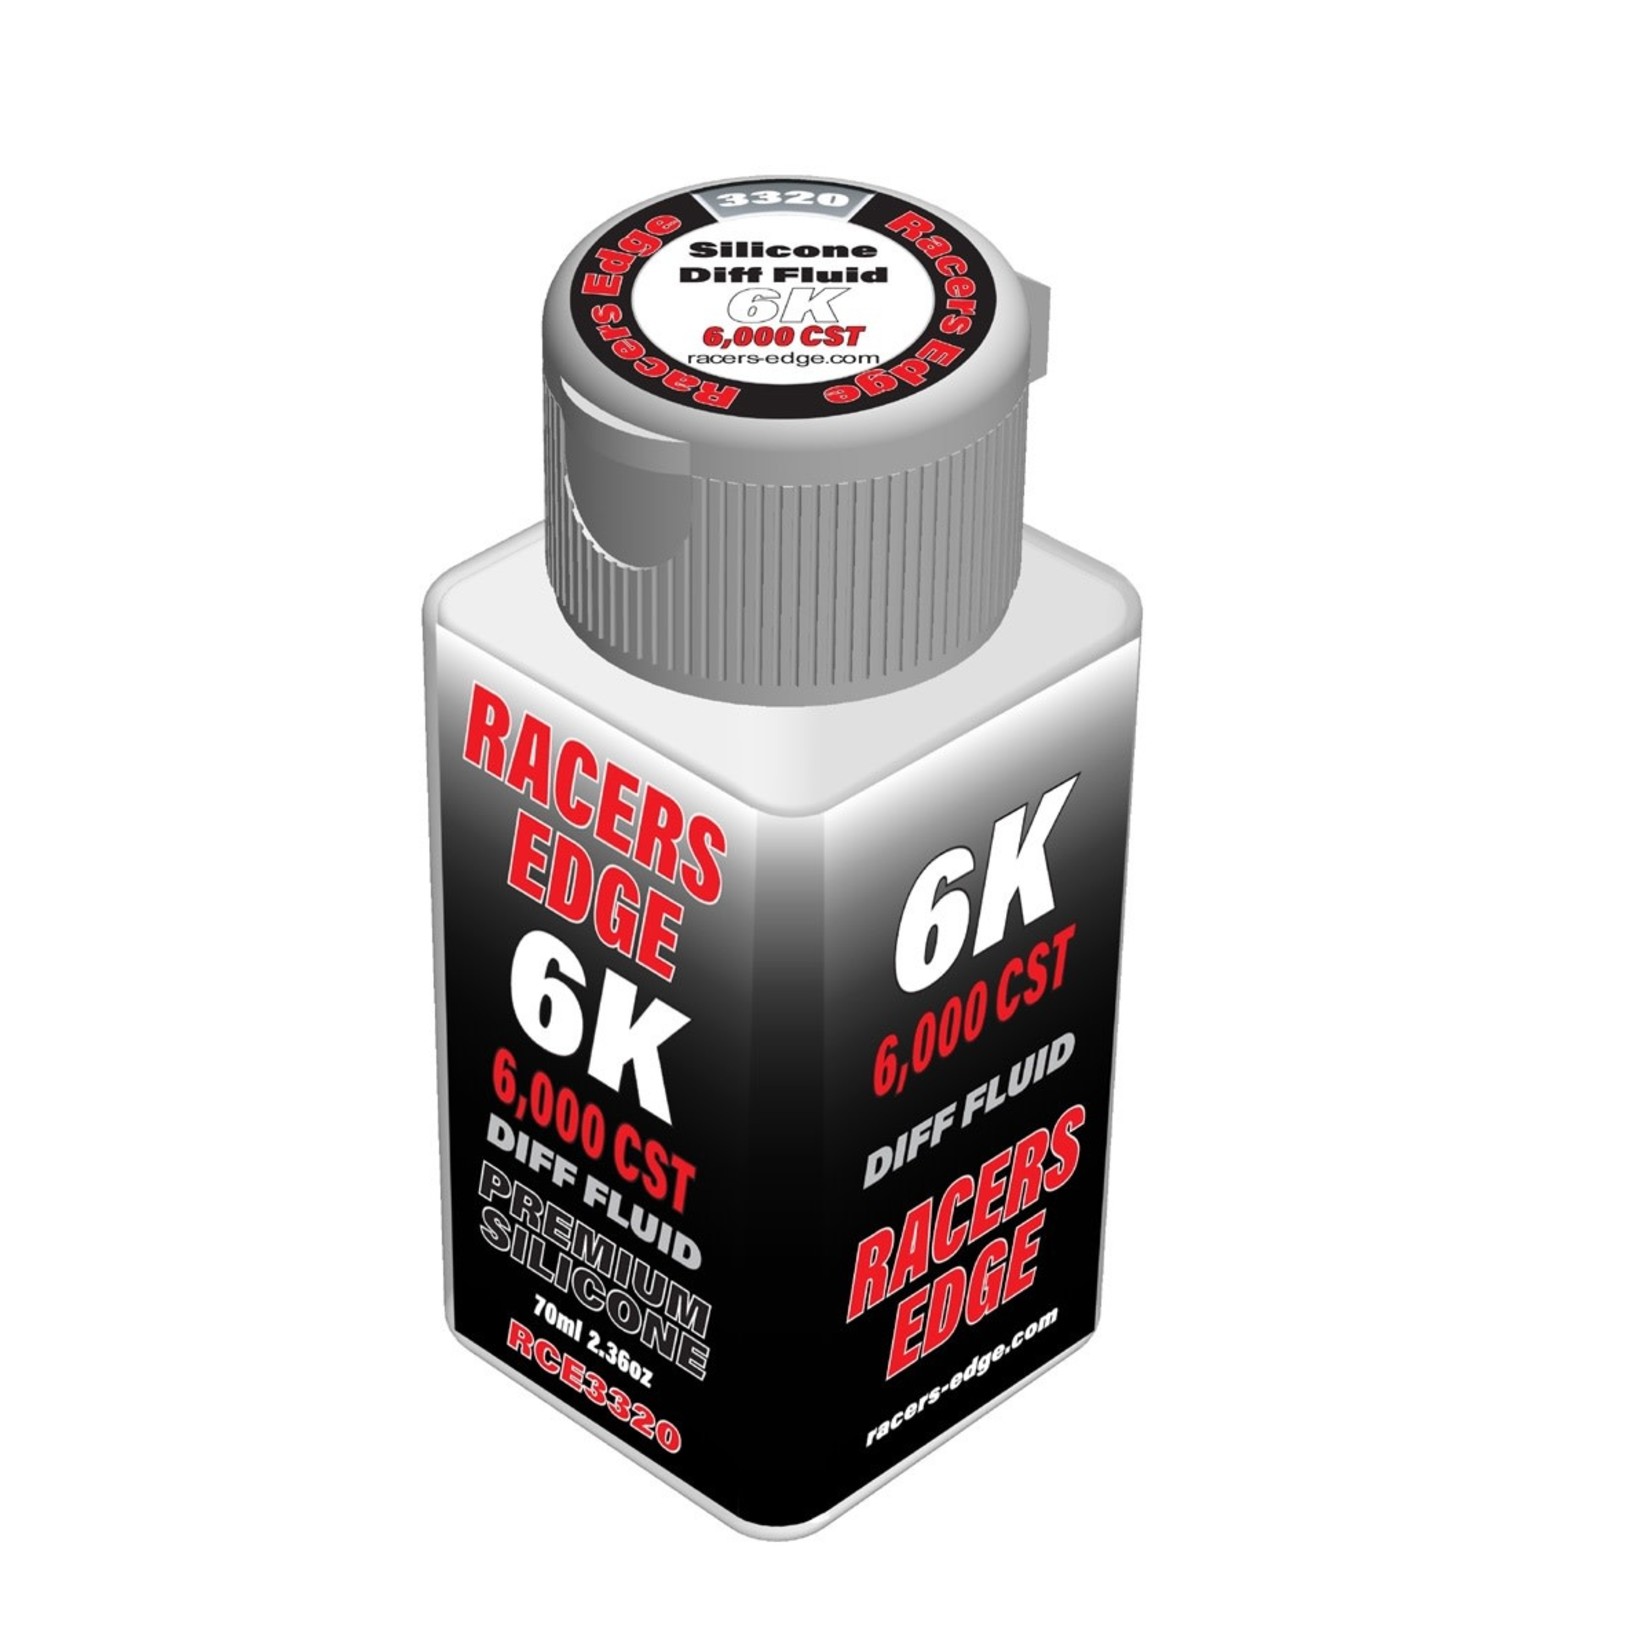 Racers Edge RCE3320 Racers Edge Pure Silicone Diff Fluid 6,000cst 70ml 2.36oz